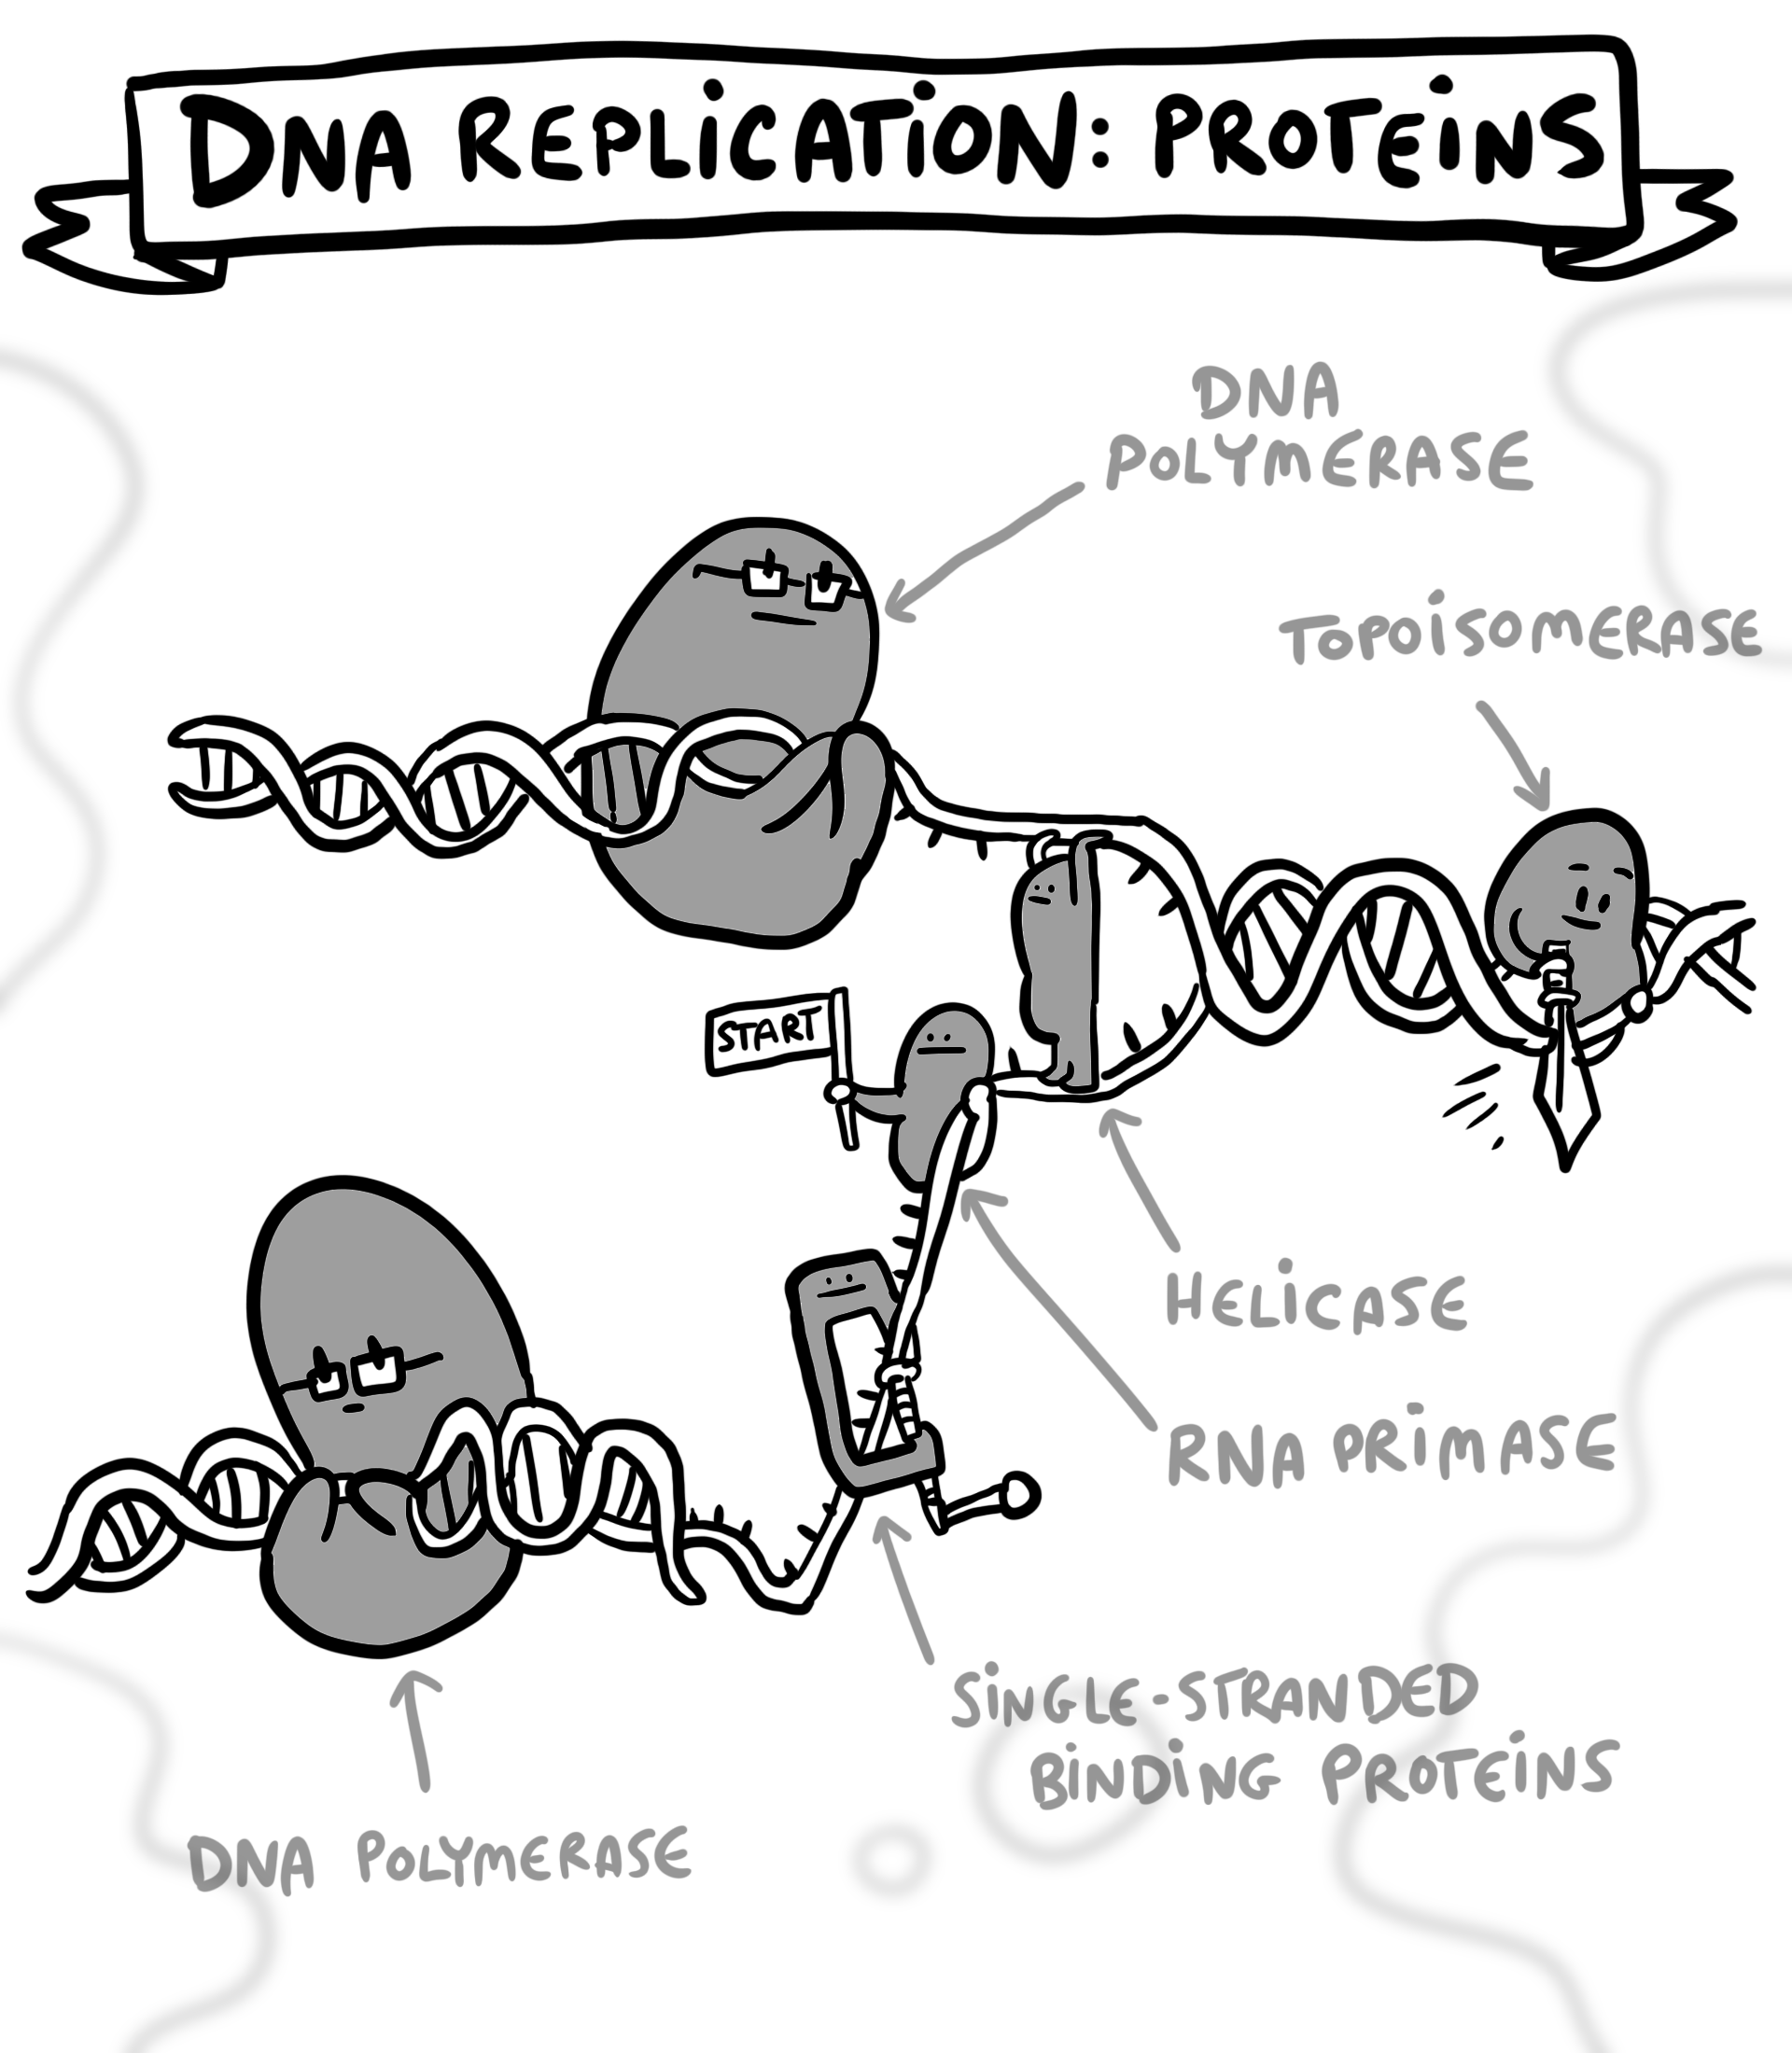 DNA REPLICATION: NOT YOUR OFFICE PHOTOCOPIER | SCQ